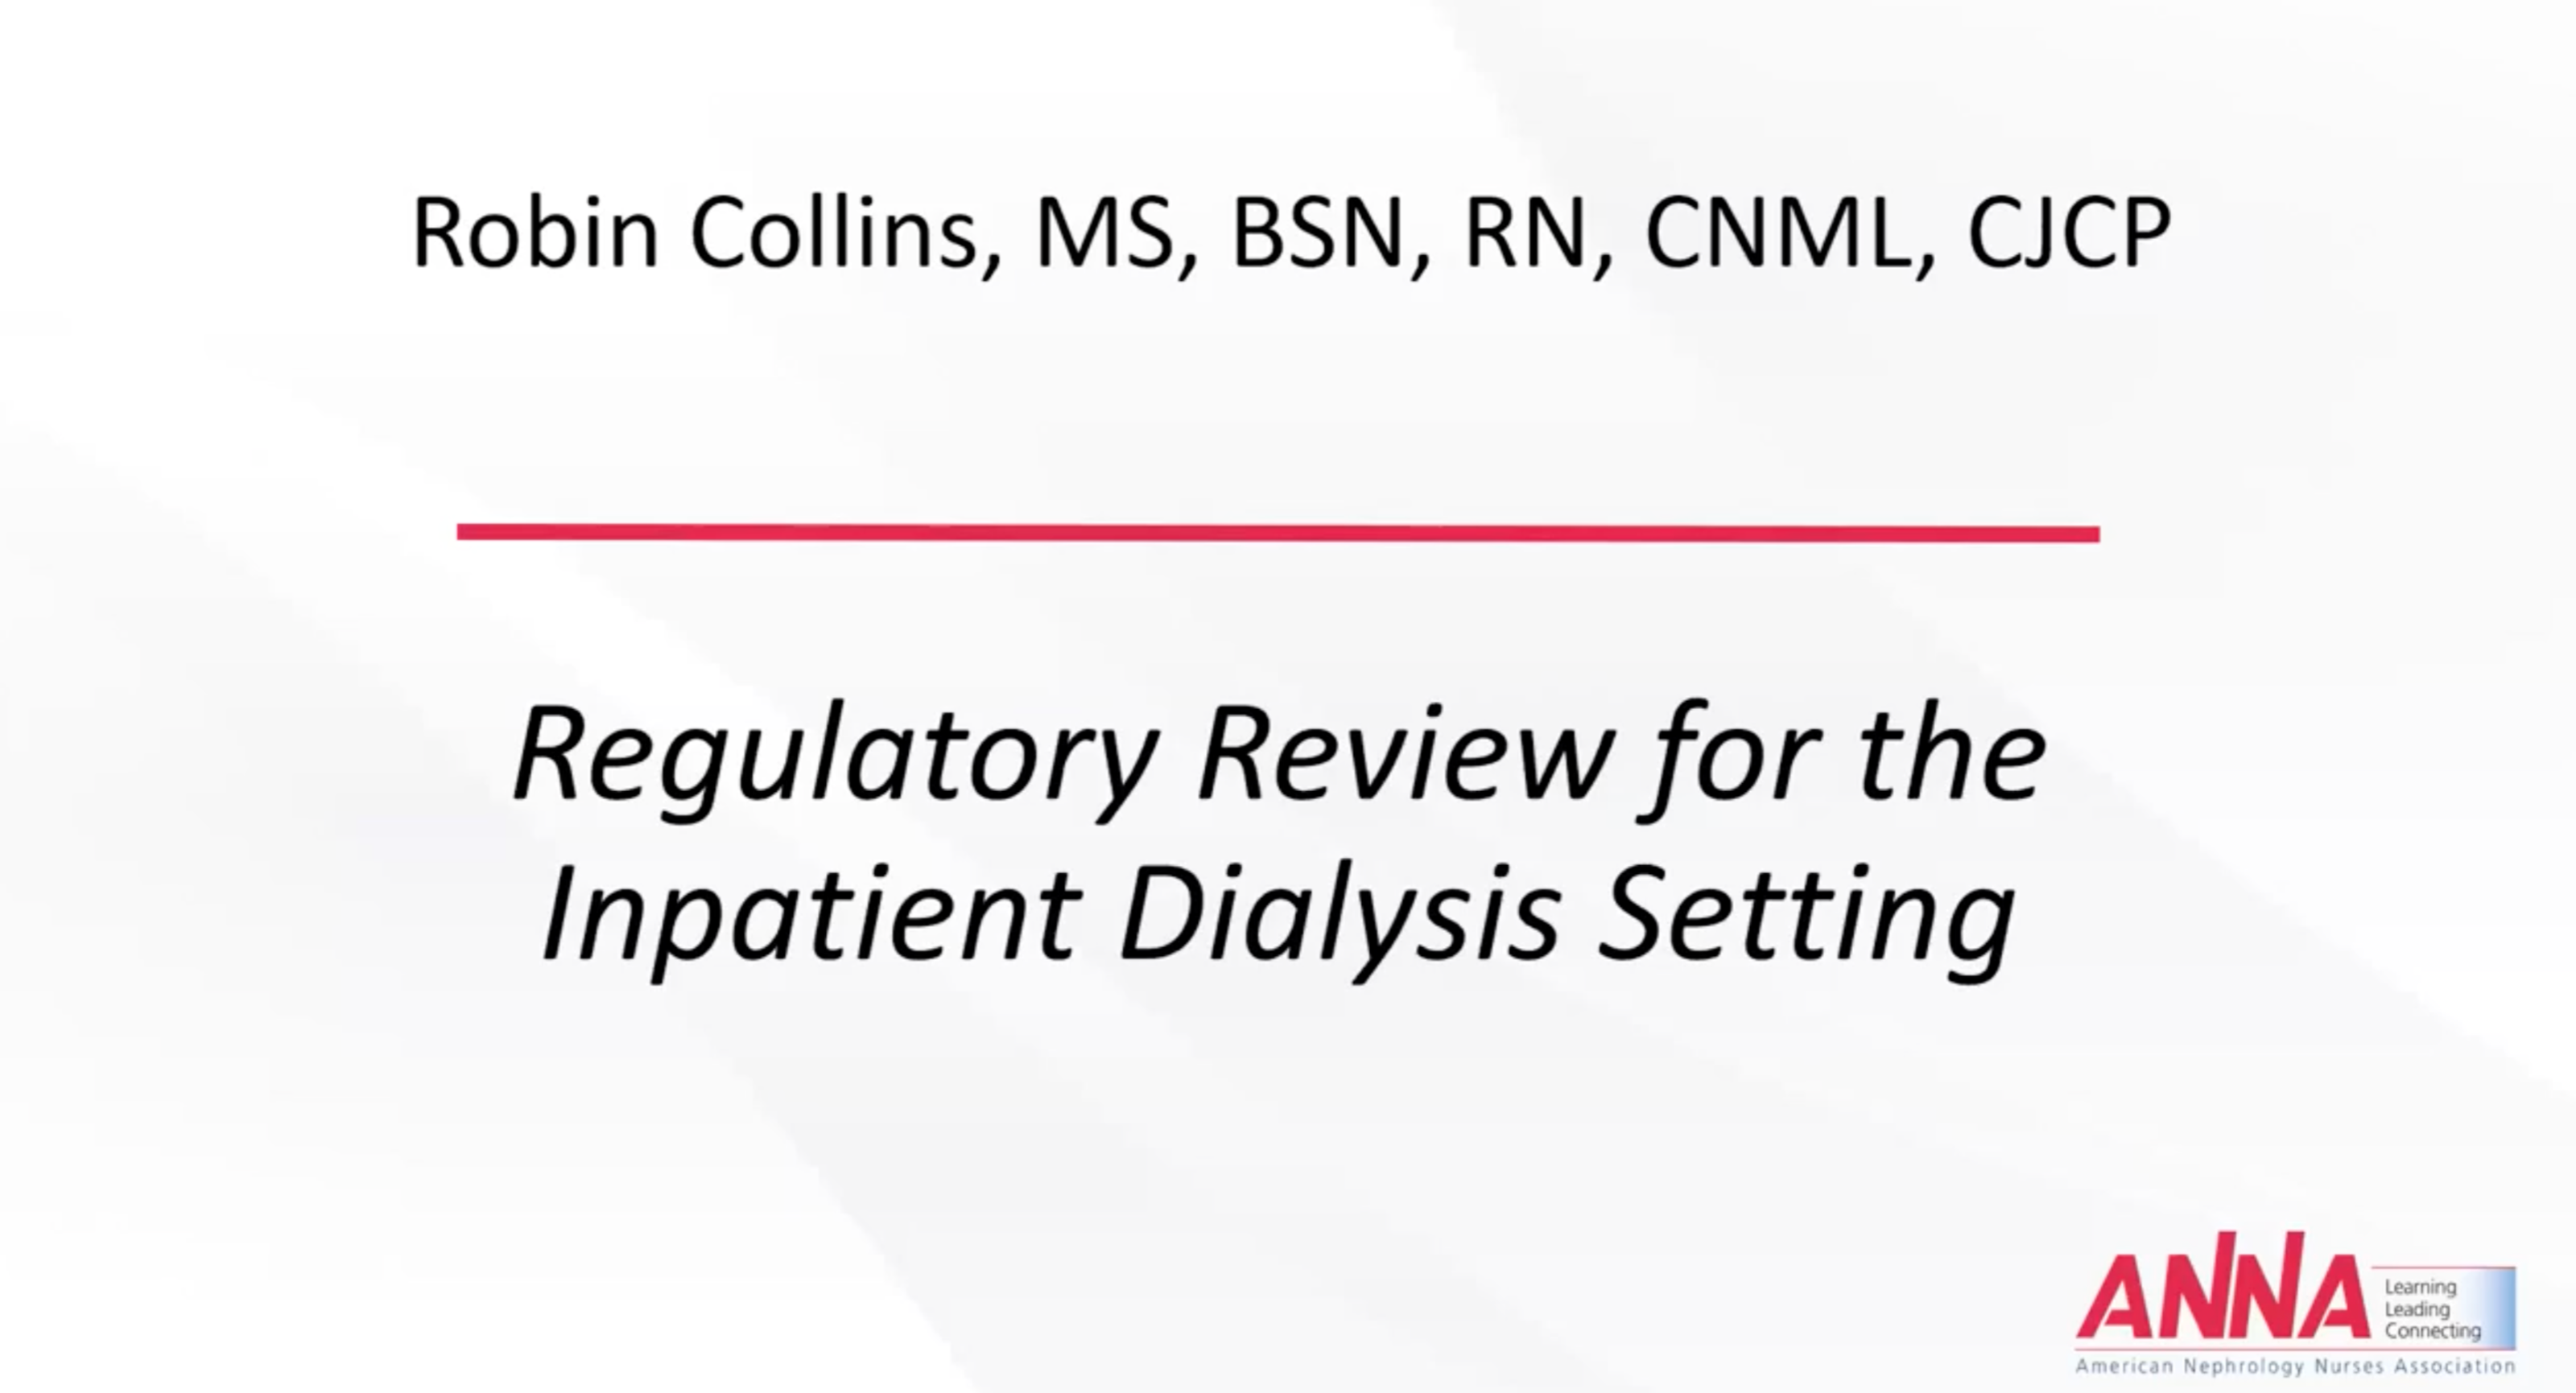 Regulatory Review for the Inpatient Dialysis Setting